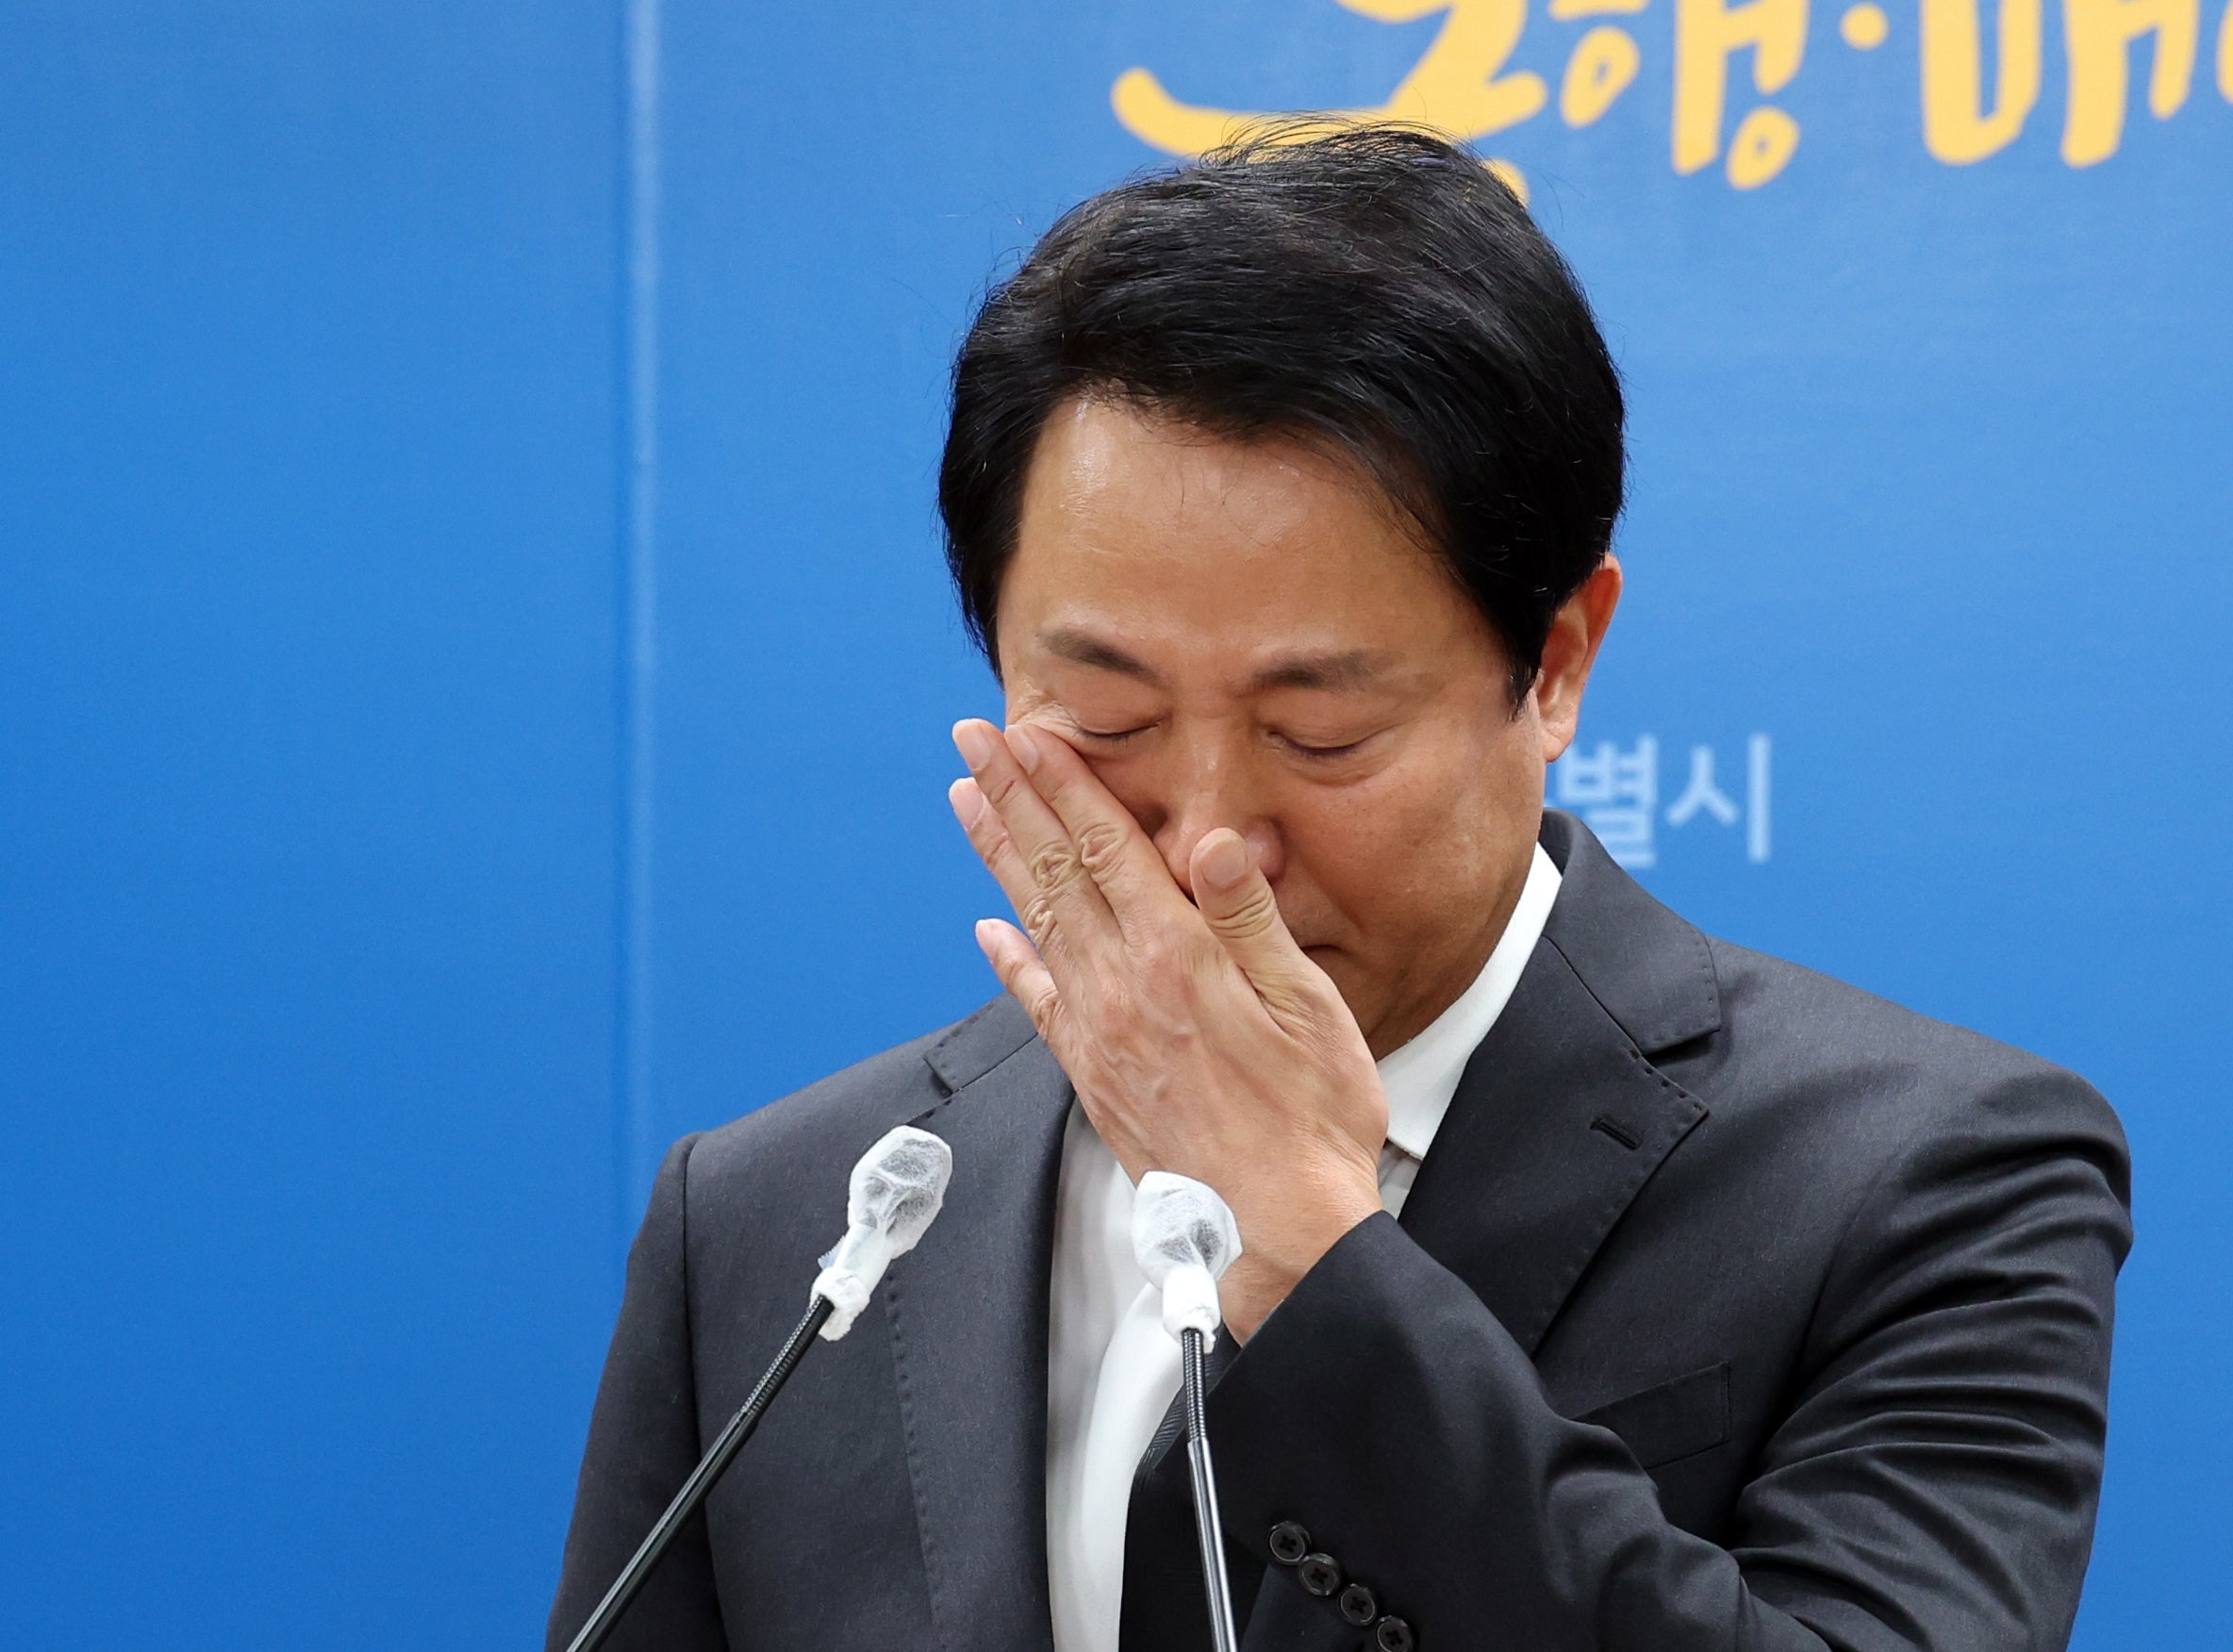 Seoul's mayor Oh Se-hoon sheds tears while making an apology for the Itaewon tragedy